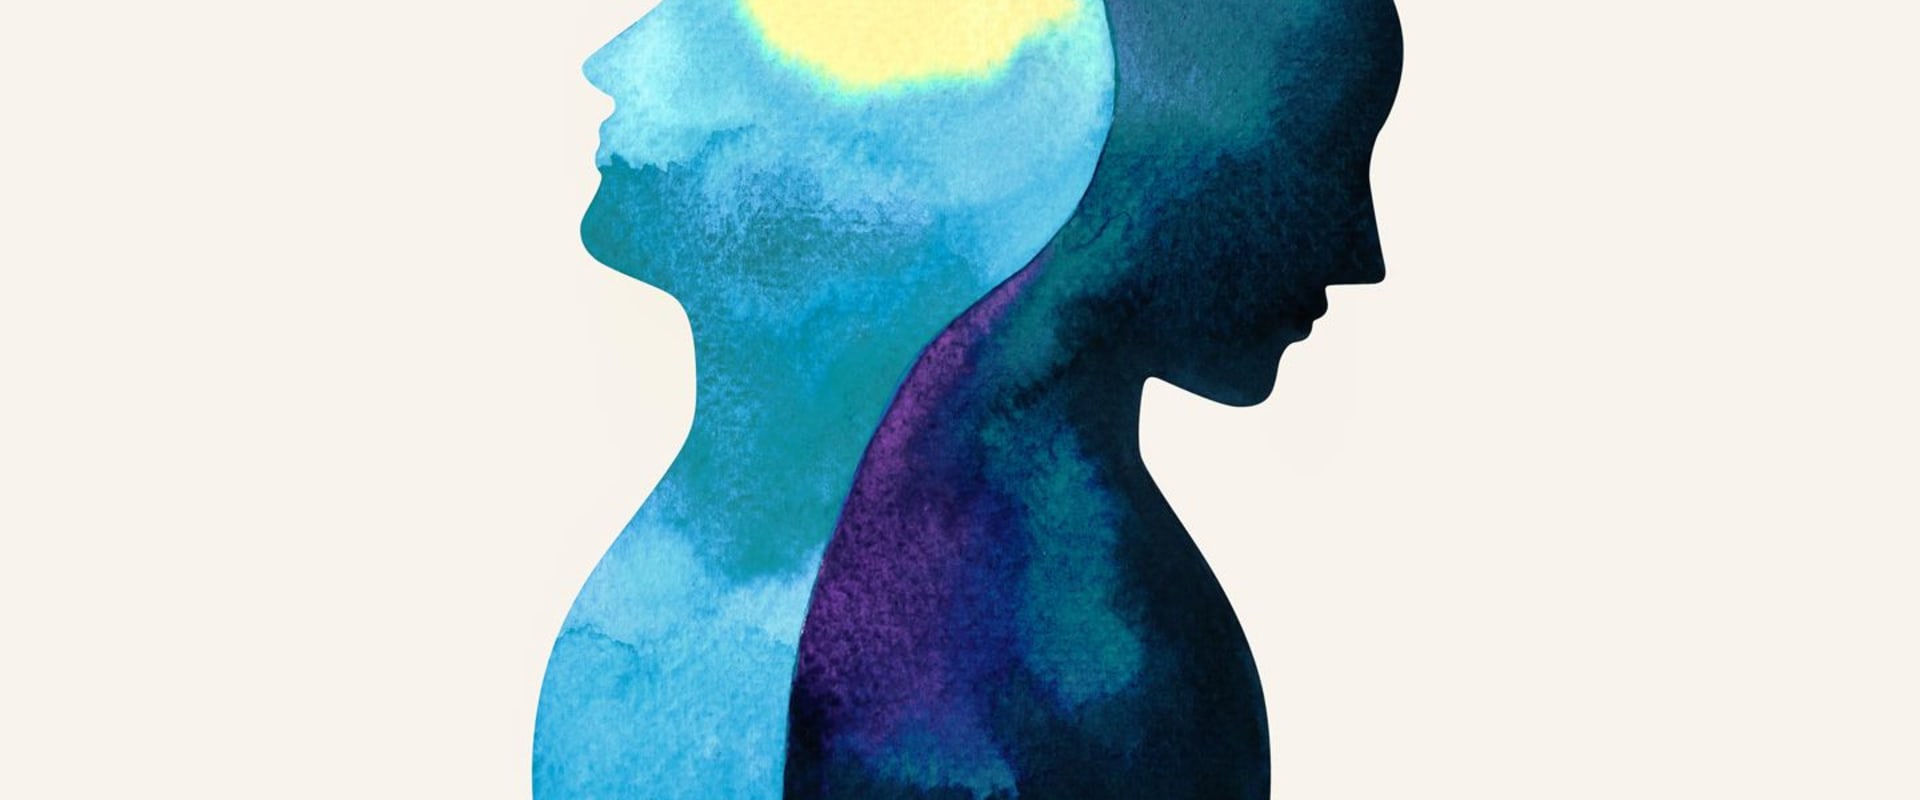 Understanding Bipolar Disorder: Why It's Important to Know